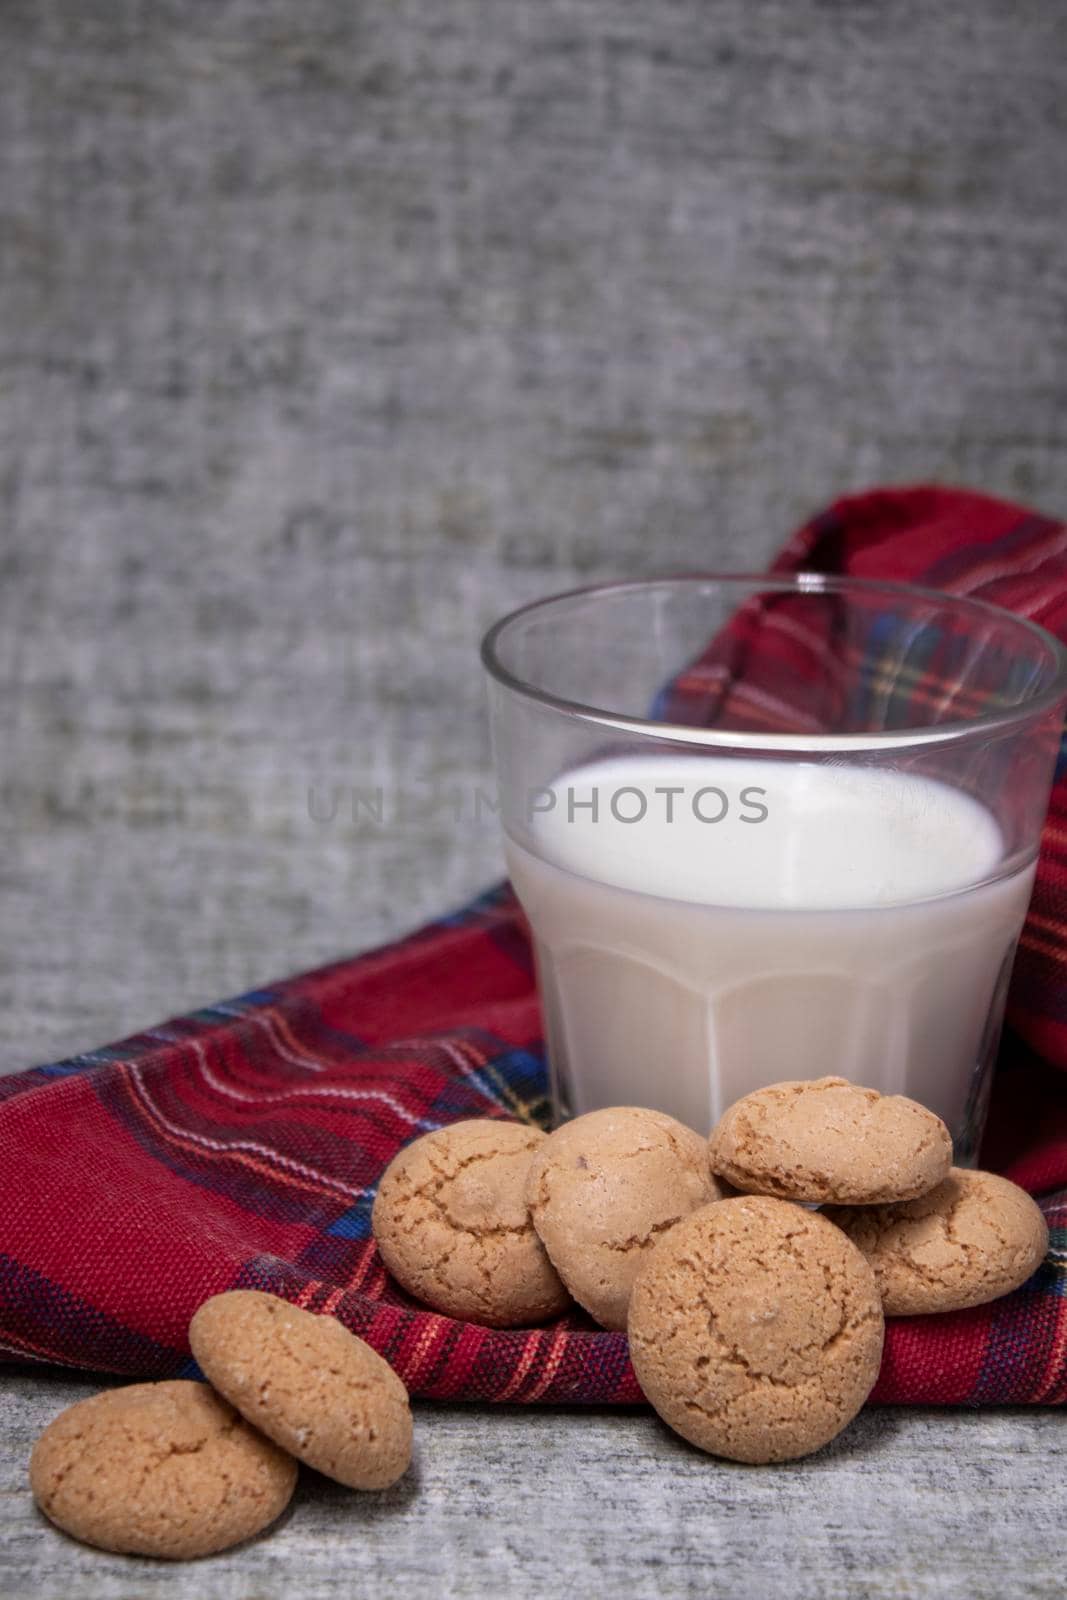 glass of milk near almond amaretti cookies on plaid red fabric tablecloth. healthy breakfast snack.